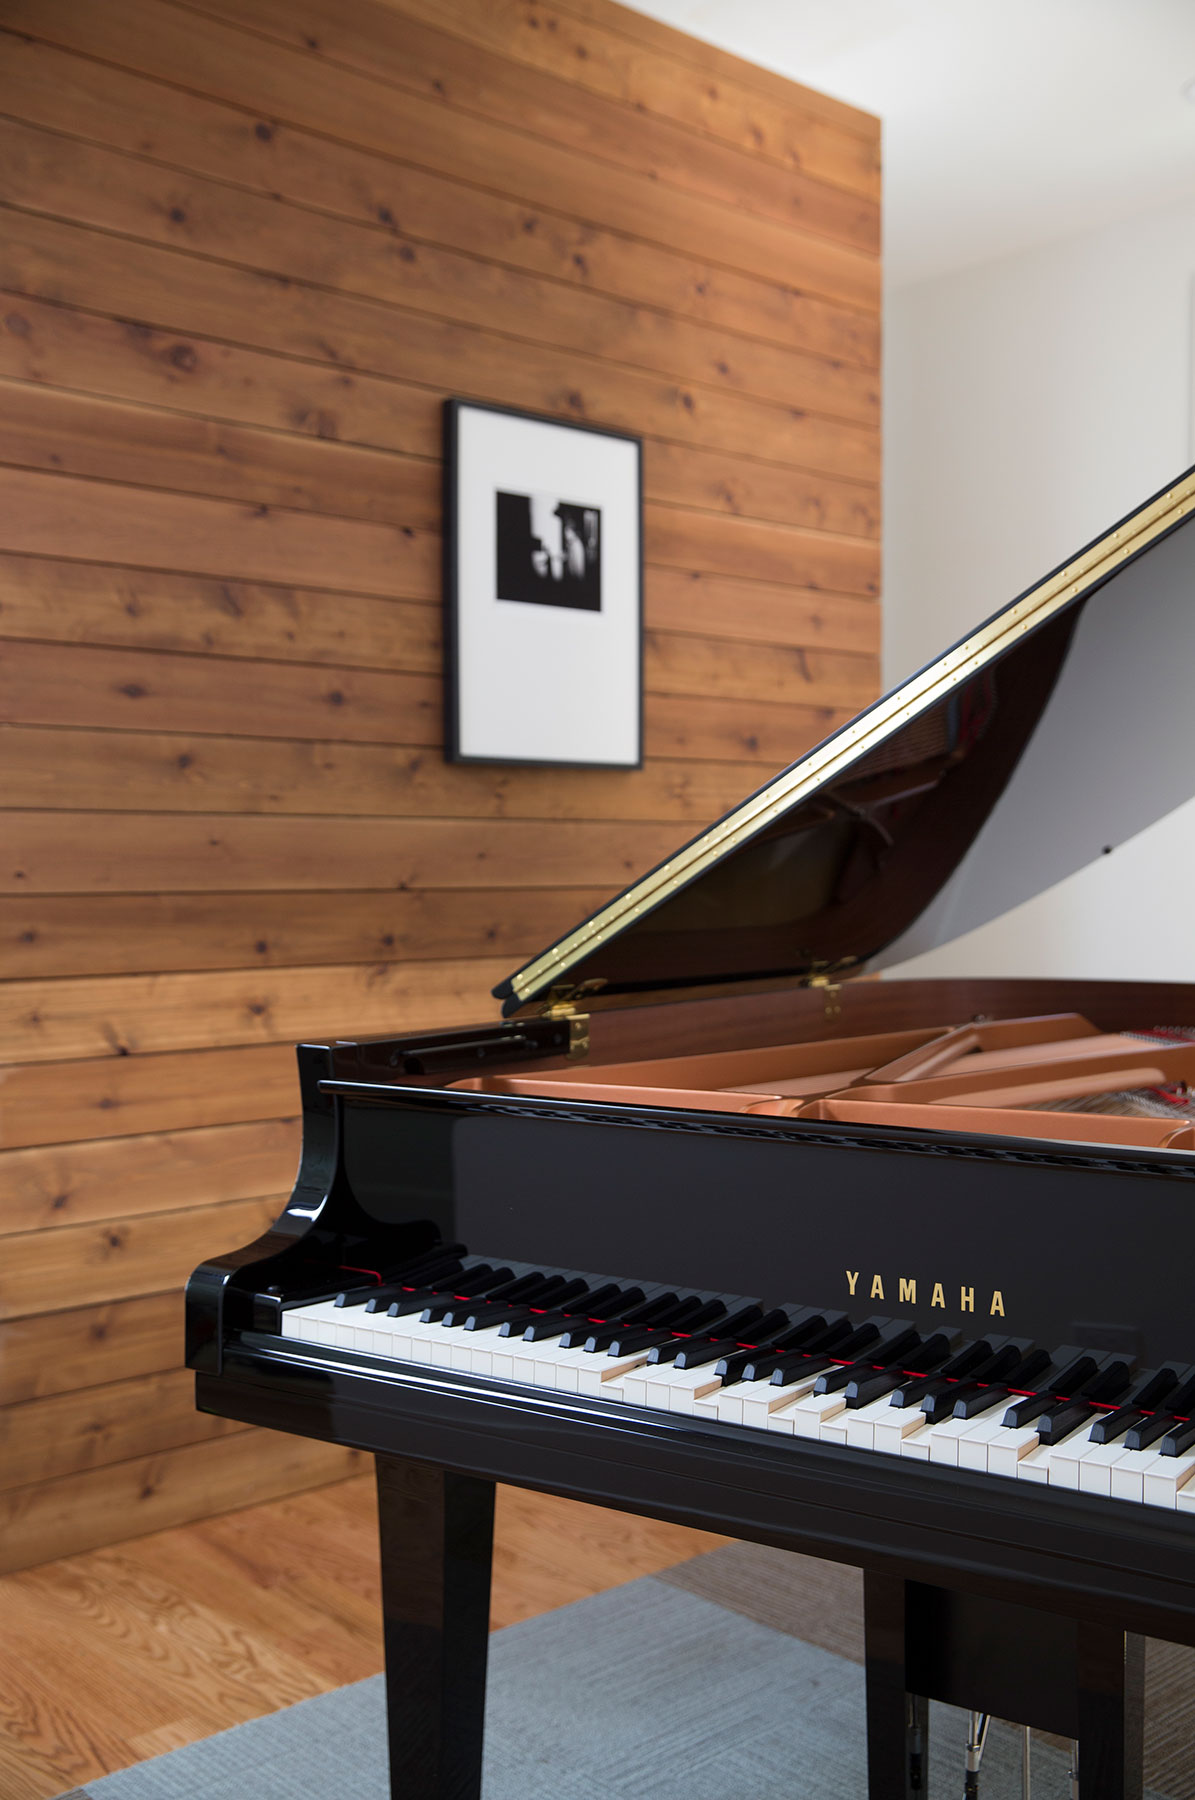 Cropped view of Yamaha baby grand piano in an apartment